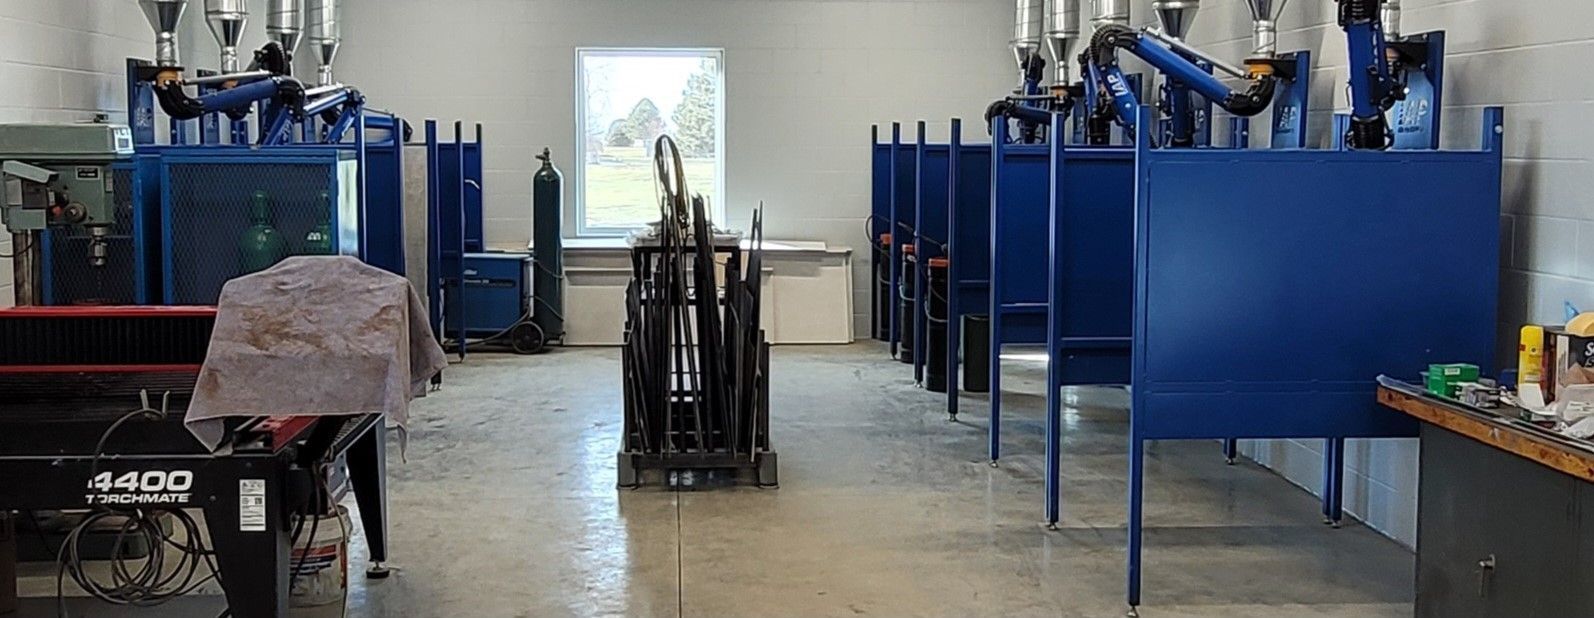 Weld booth layout at a high school